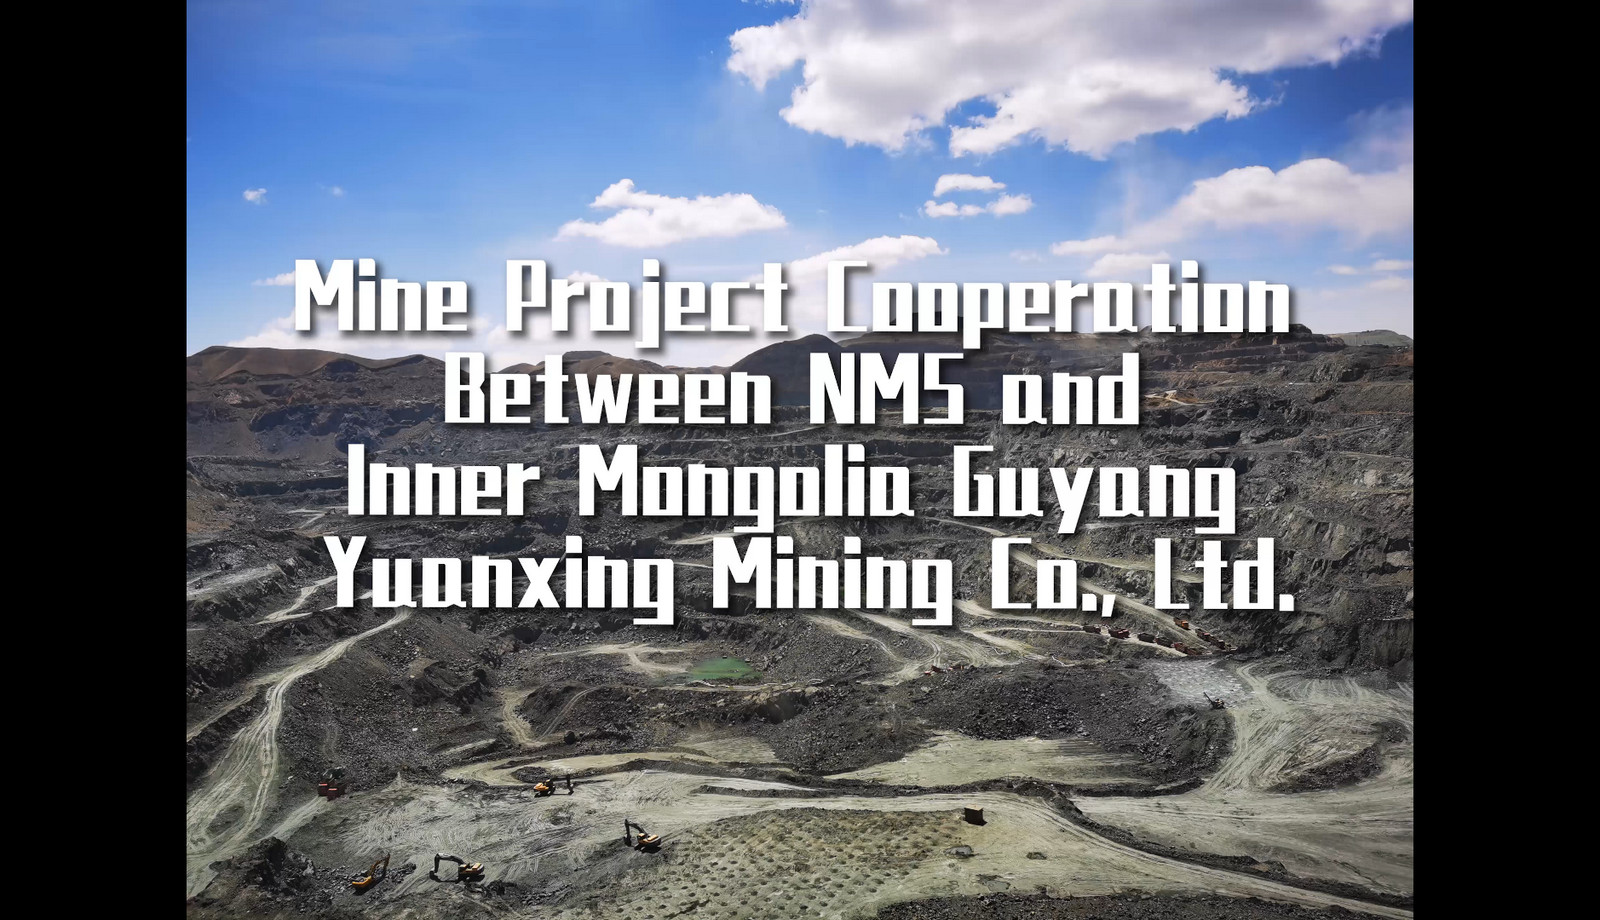 Mine Project Cooperation Between NMS and Inner Mongolia Guyang Yuanxing Mining Co. Ltd.